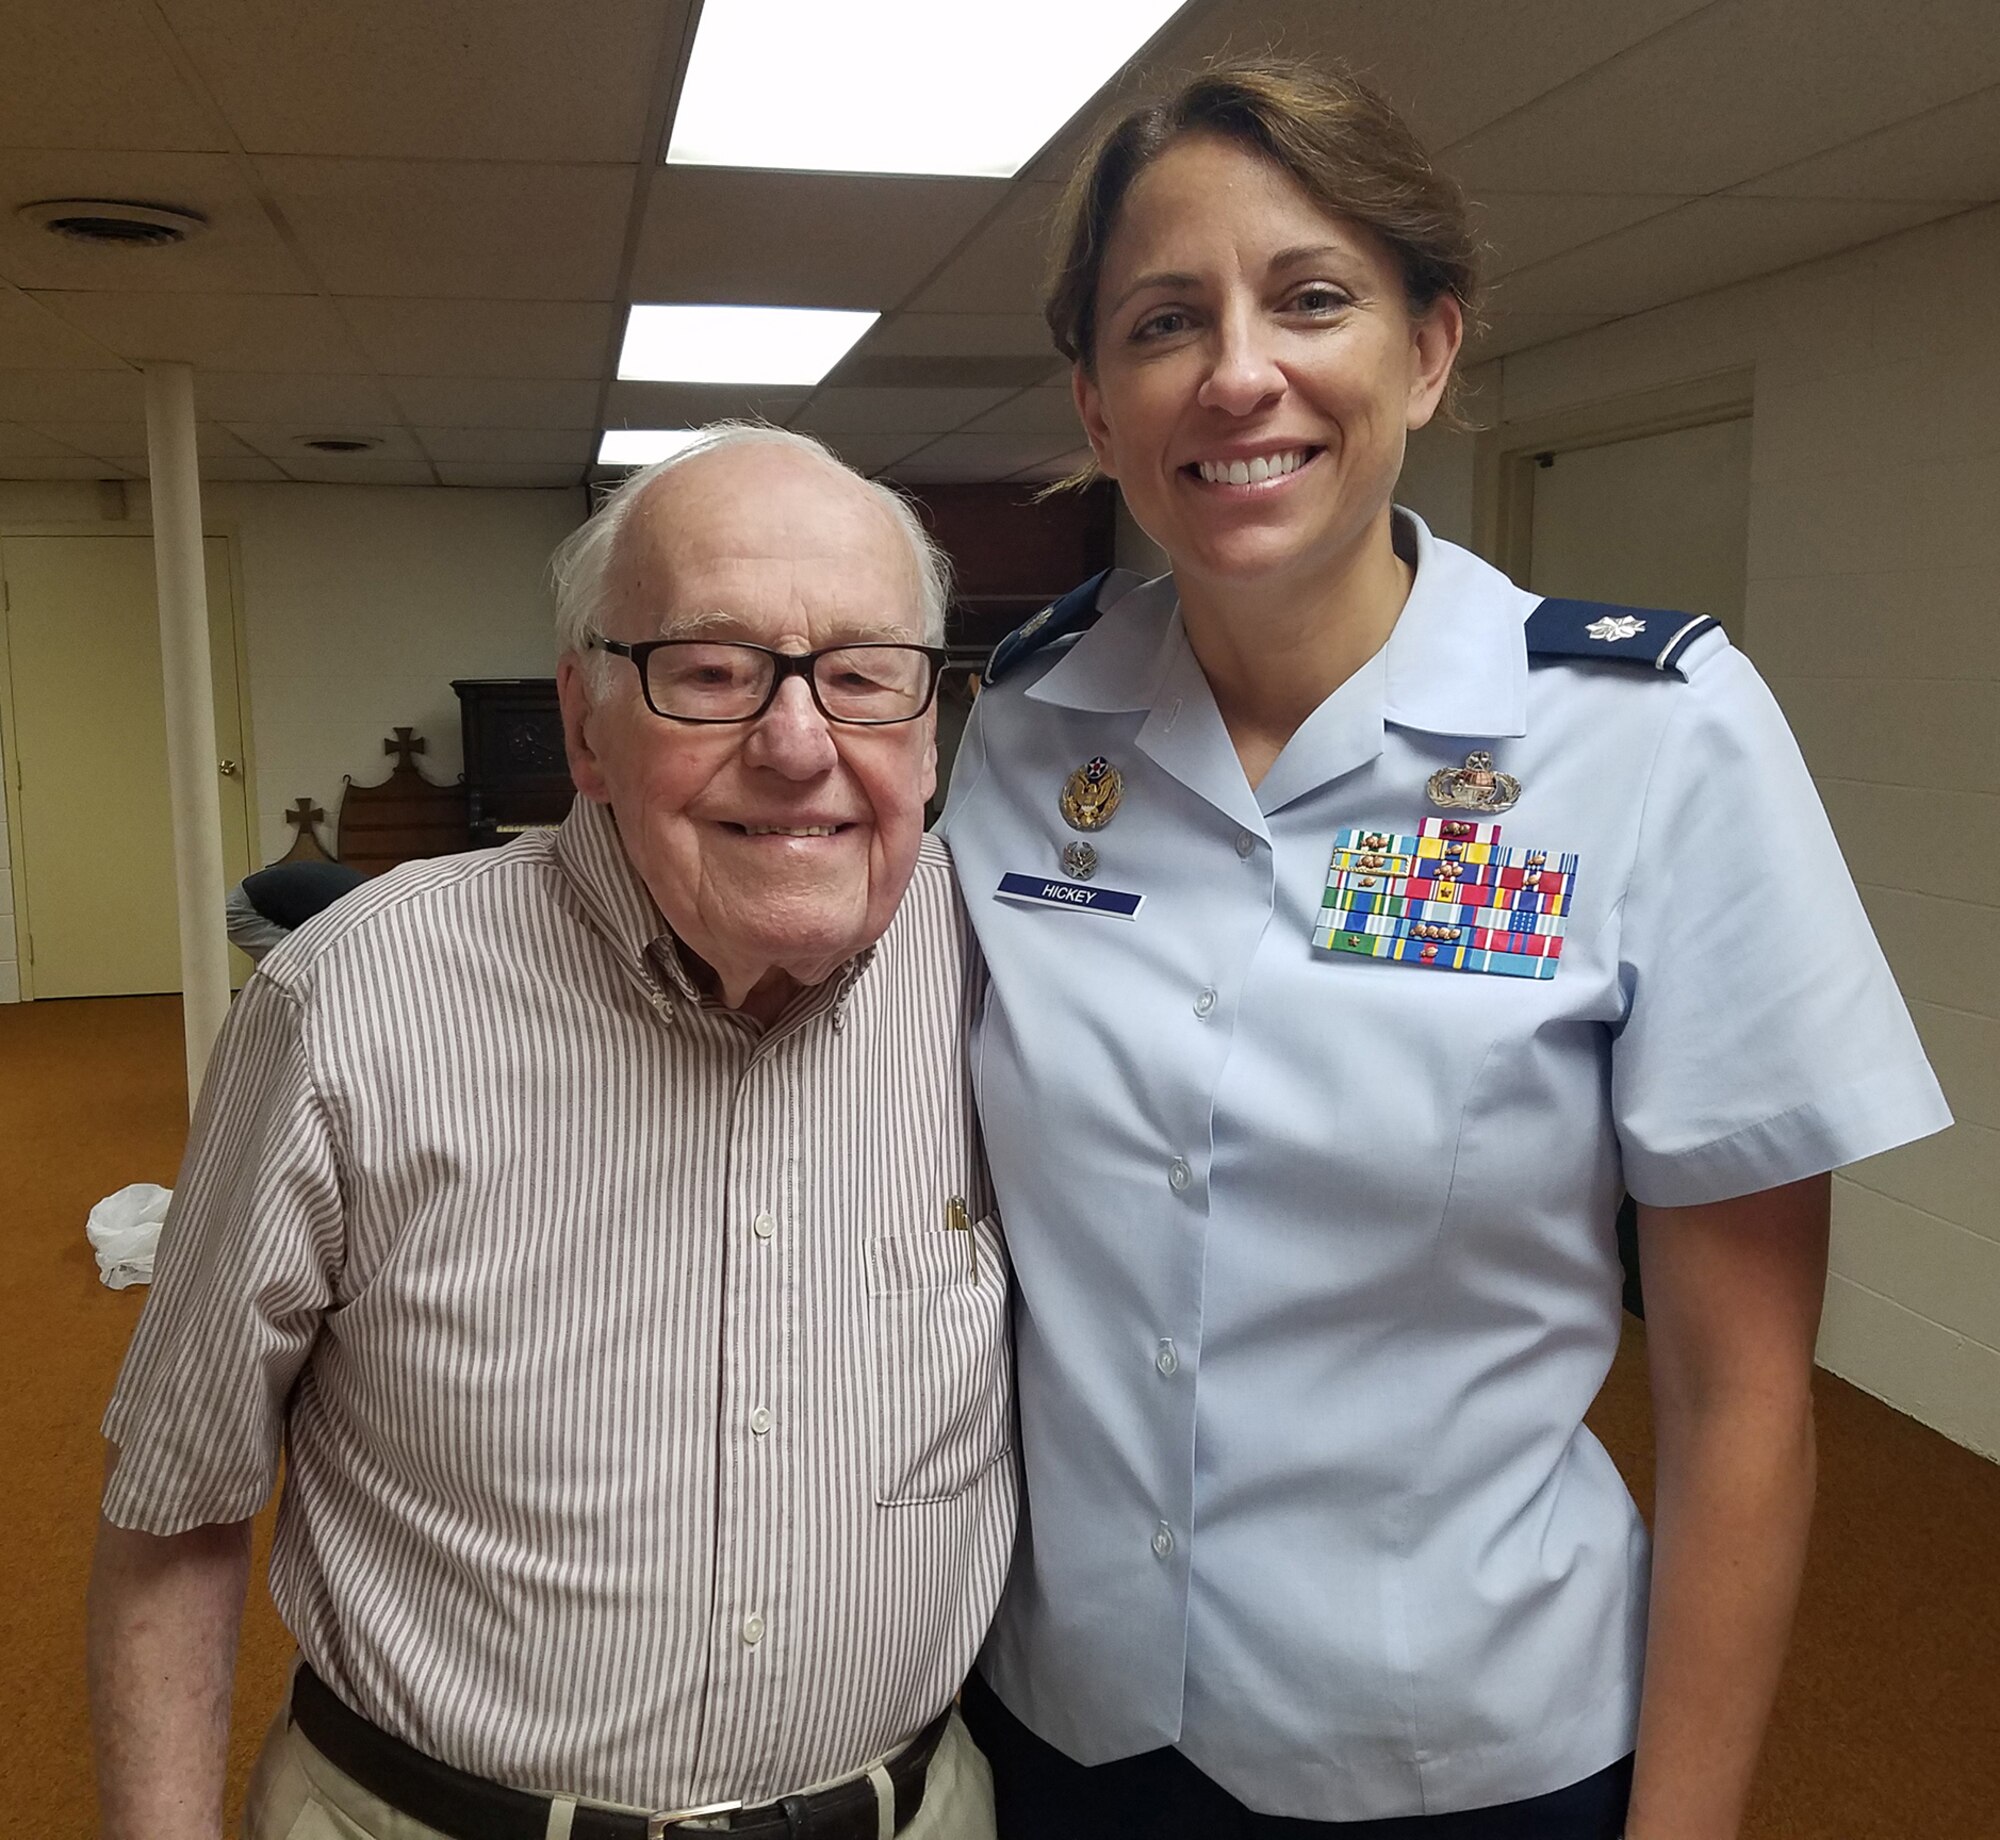 WRIGHT-PATTERSON AIR FORCE BASE, Ohio – Lt. Col. Dianne Hickey, 14th Intelligence Squadron commander, met World War II veteran John Johnson June 15, 2016 after learning about his connection to the 14th IS. Johnson was discovered after two years of historical research by the 14th IS as the unit tried to uncover its lineage. Johnson served in the 9th Photographic Technical Squadron during the time of the atomic strikes on Hiroshima and Nagasaki.  (Courtesy photo)